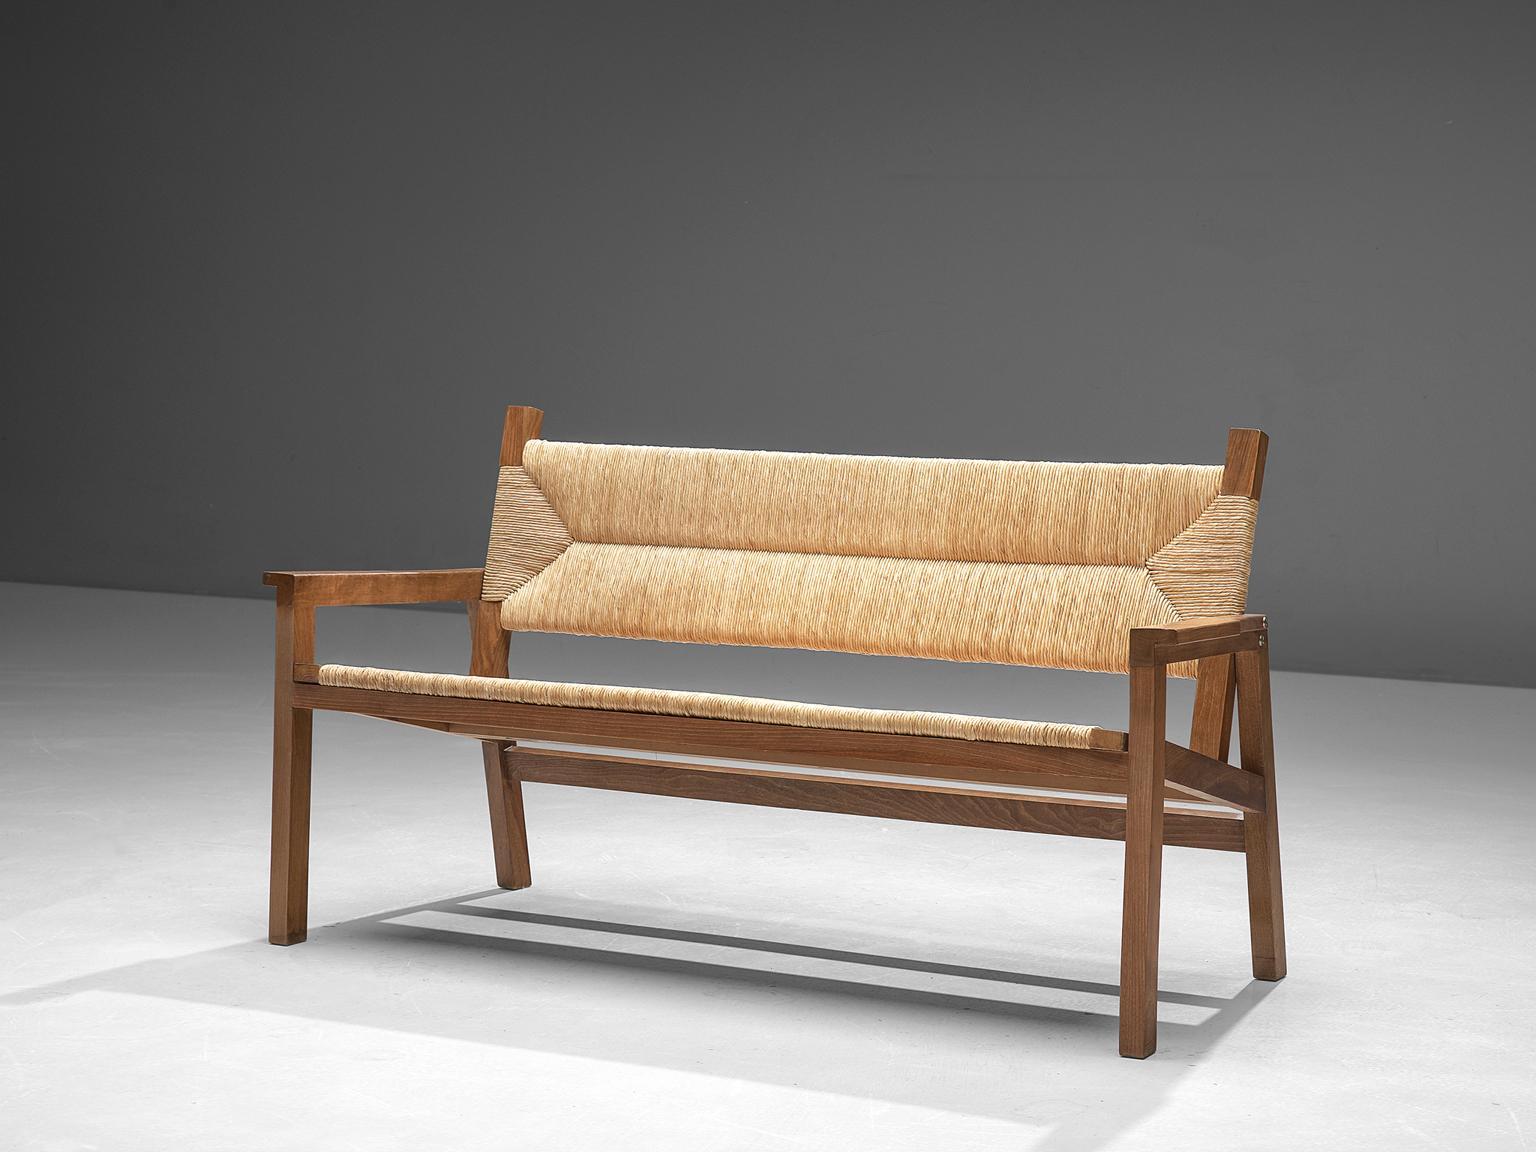 Muebles Execo, bench, cane and walnut, Spain, 1970s

This midcentury bench is made of walnut and cane. The design is very simplistic and modest, yet refined and elegant details. Such as the armrests, that have a sculptural touch. The seat and